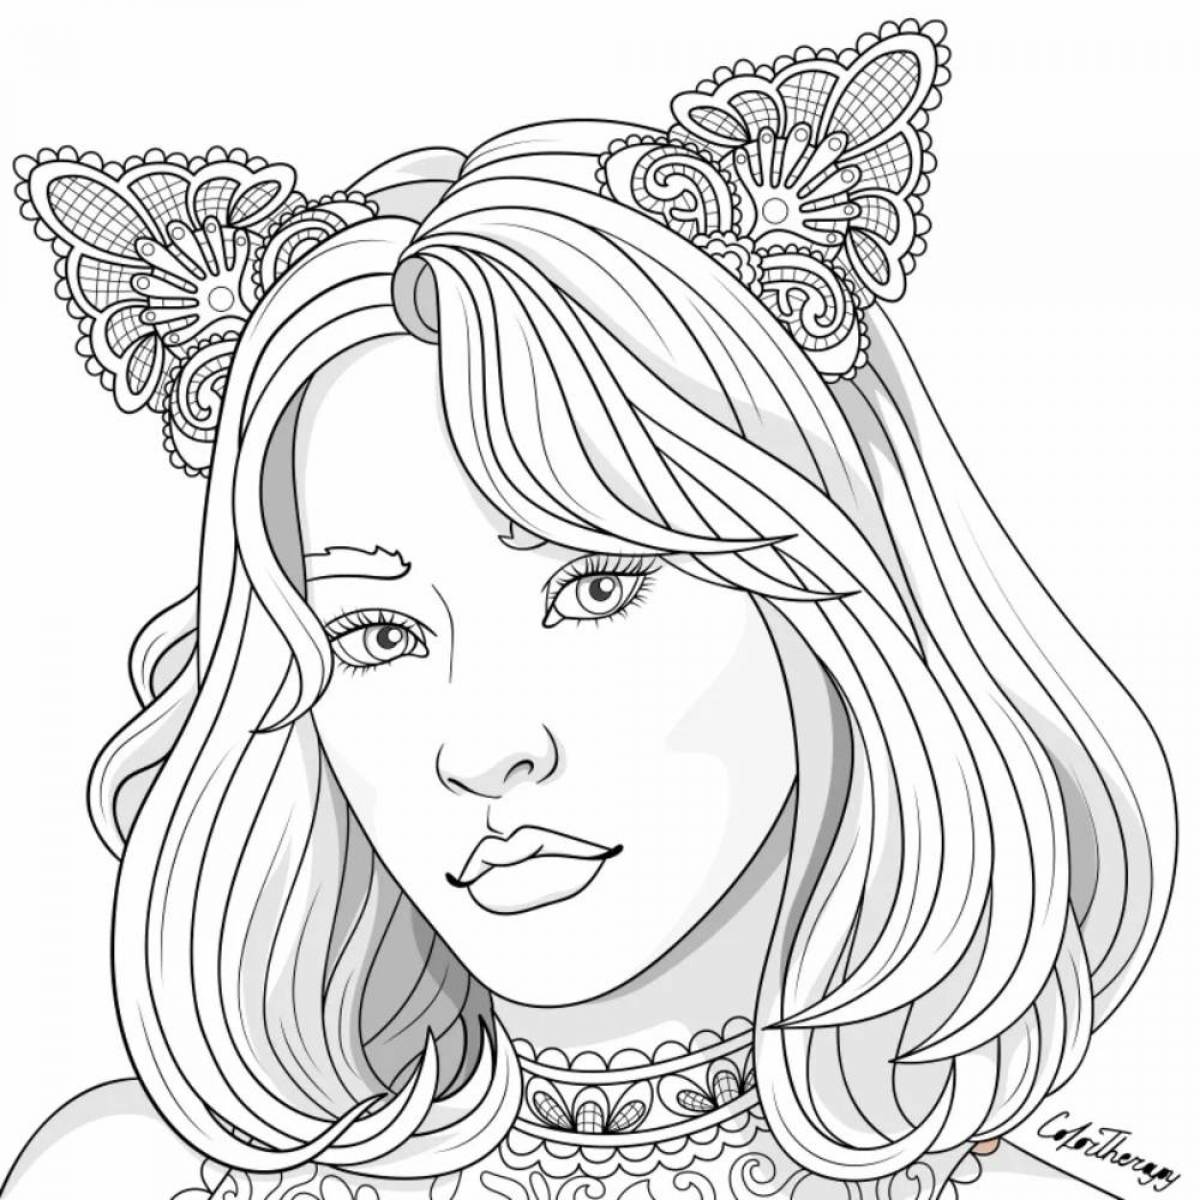 Coloring pages new for 2020: brilliant and spectacular